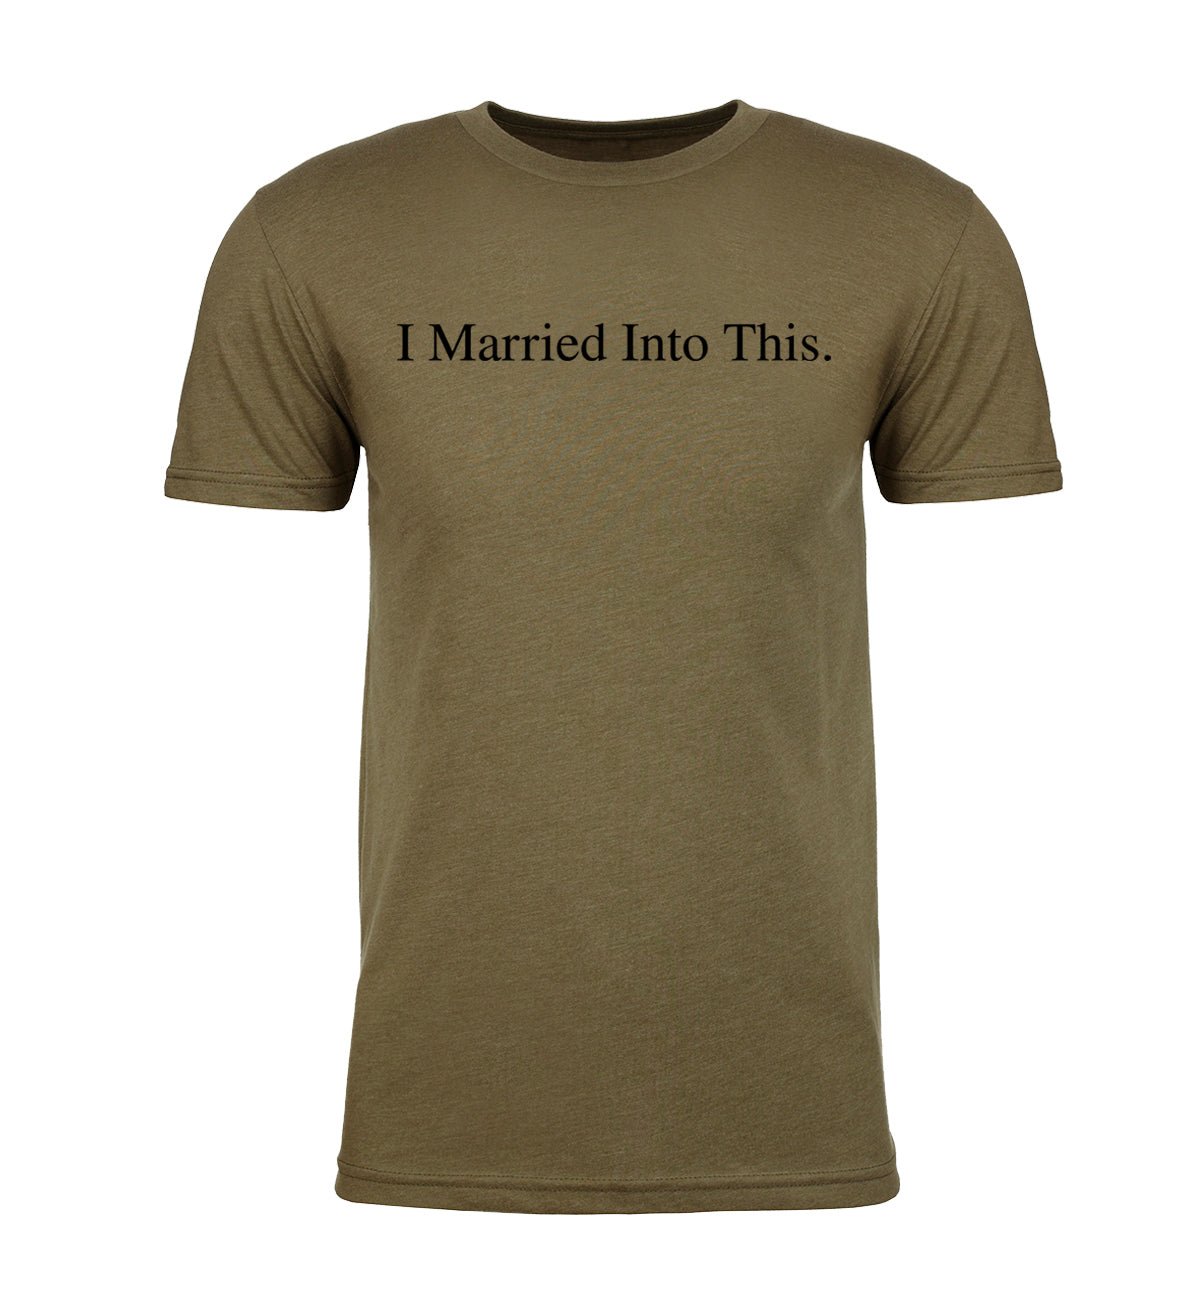 I Married Into This. Unisex T Shirts - Mato & Hash